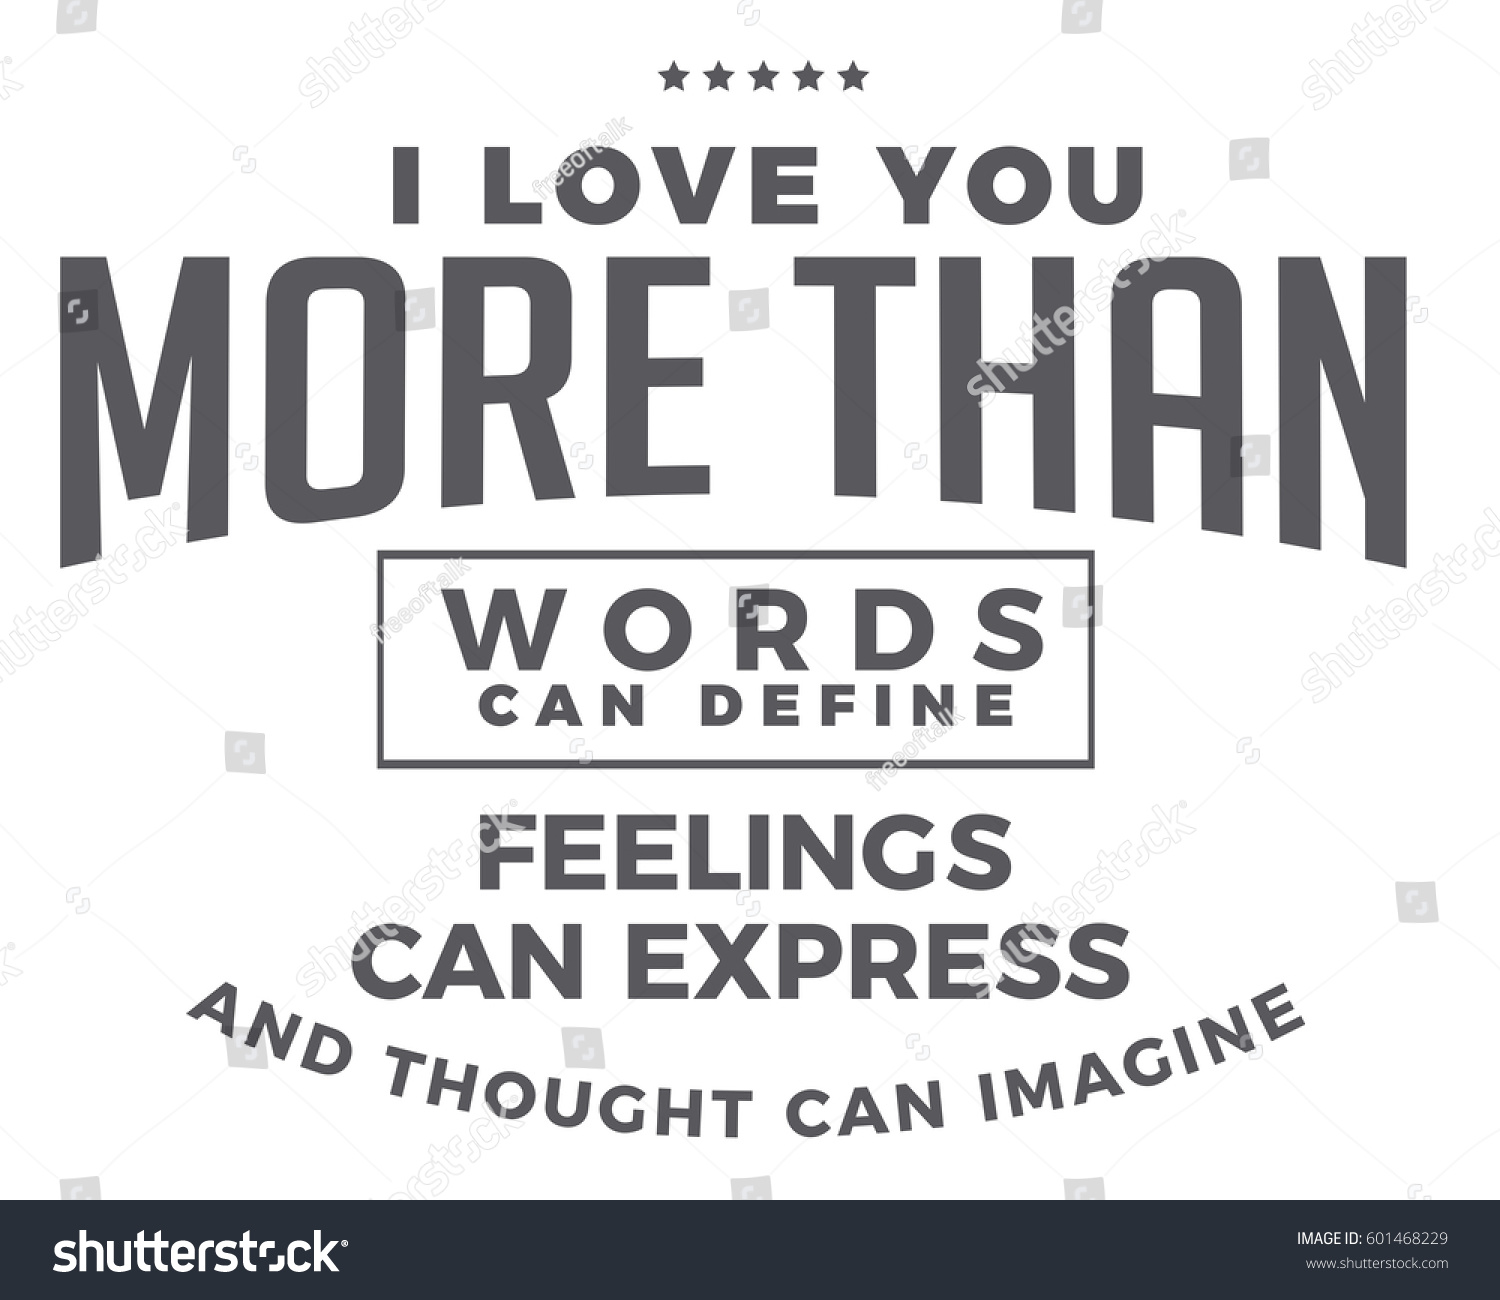 I Love You More Than Words Can Define Feelings Can Express And Thought Can Imagine Love Quote